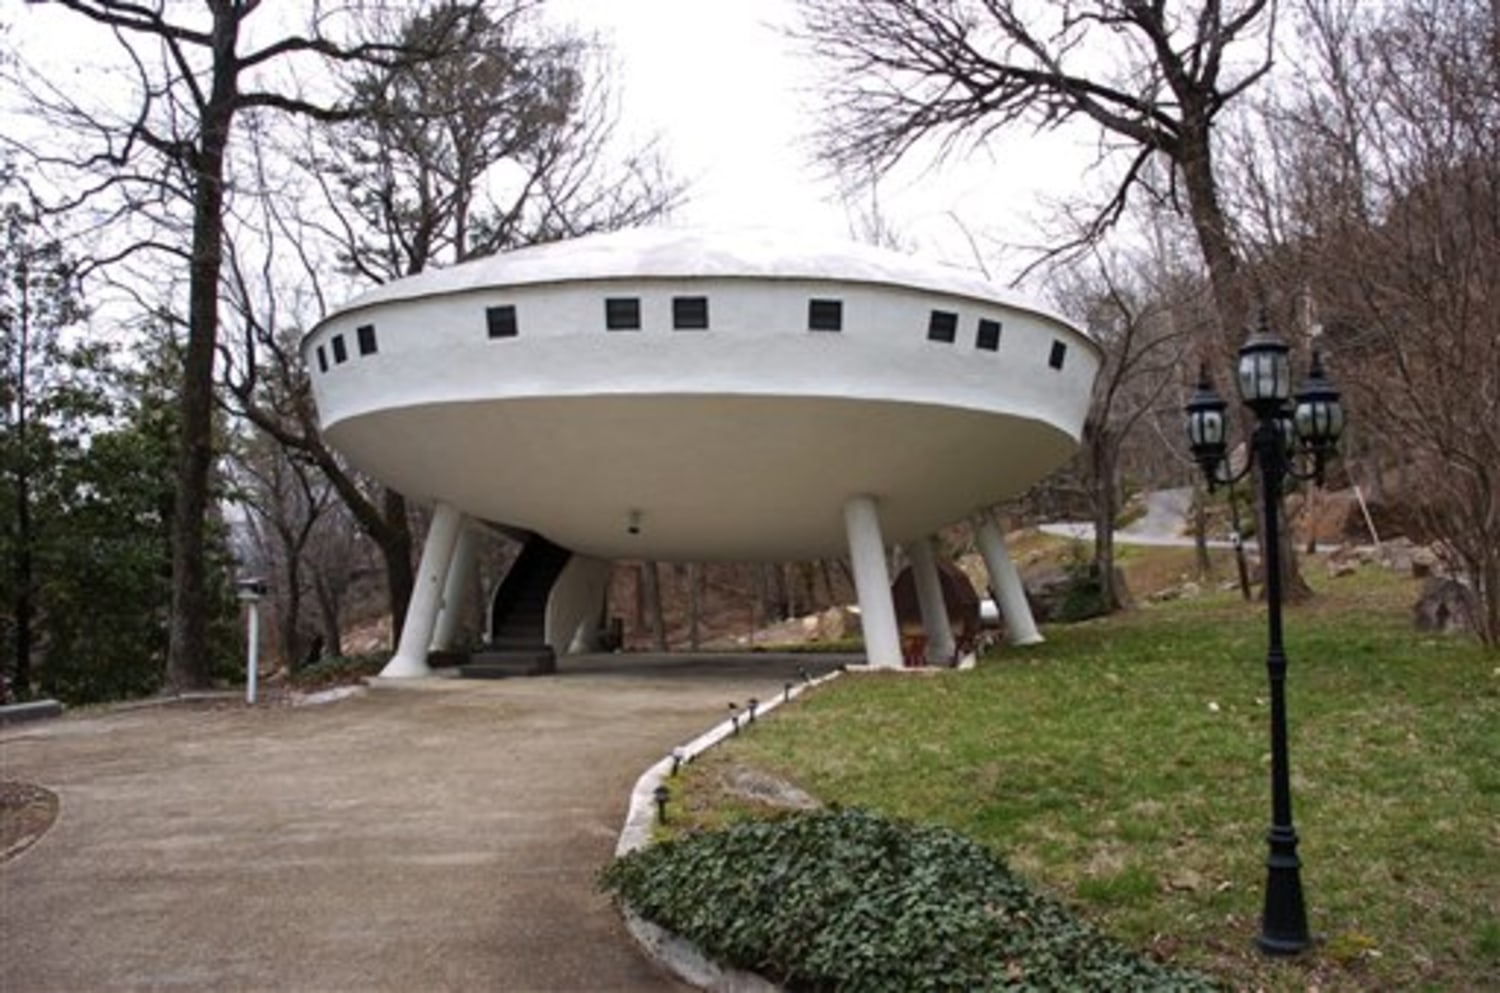 Price for flying-saucer house fails to take flight